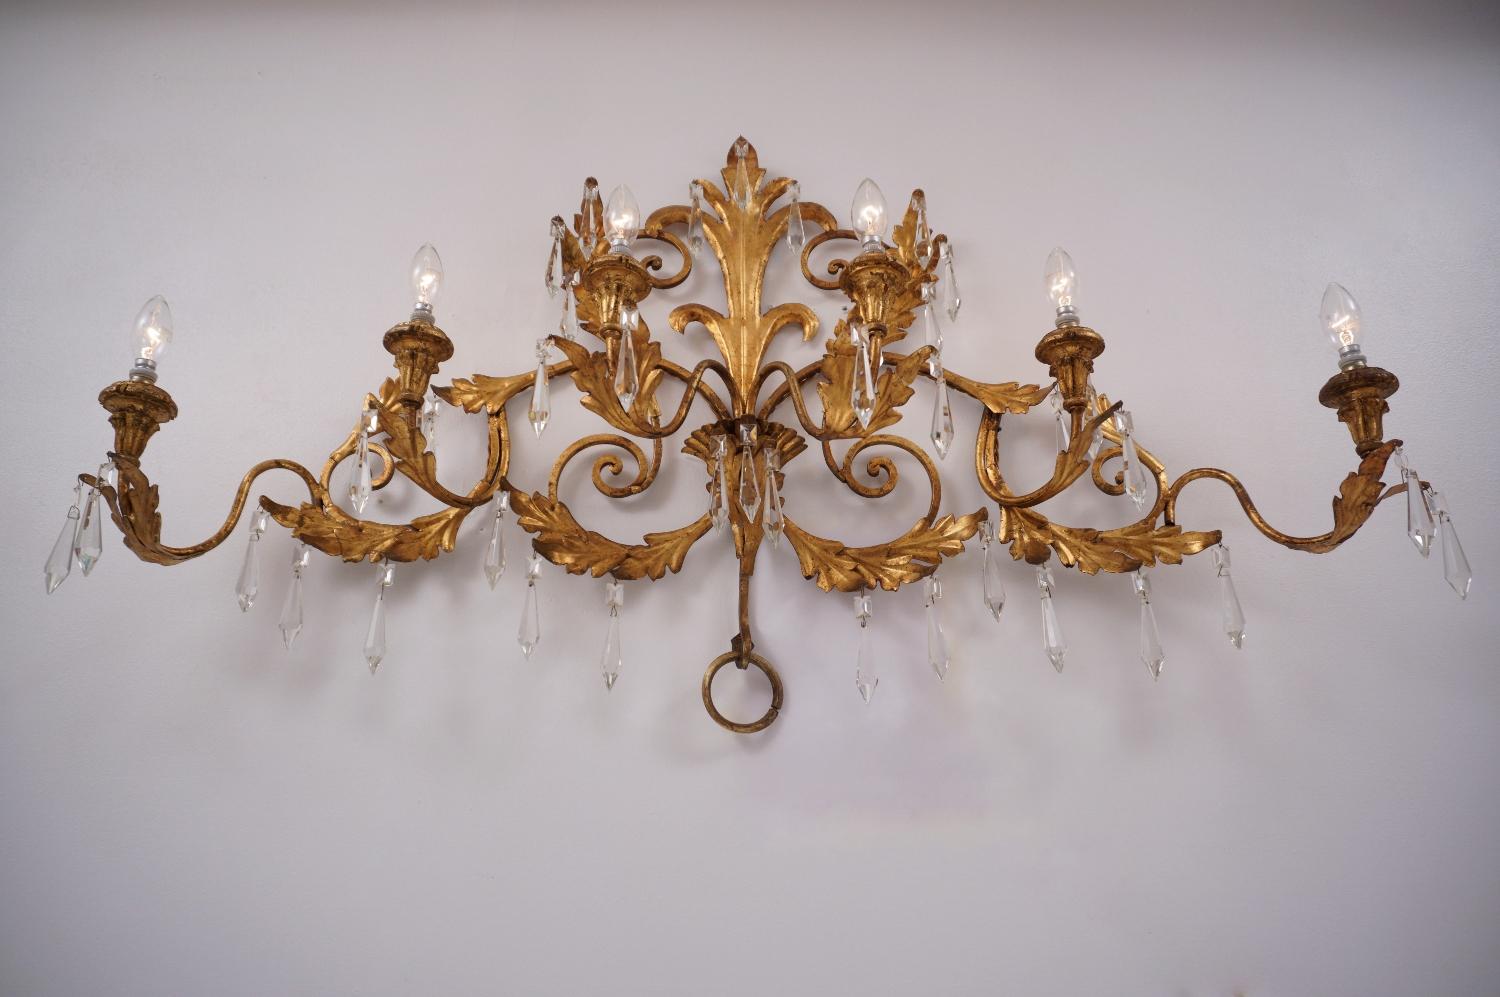 Gold Plate Gilt Tone Sconce, Large 120cm and 6 Lights with Crystals, circa 1950s, Italian For Sale